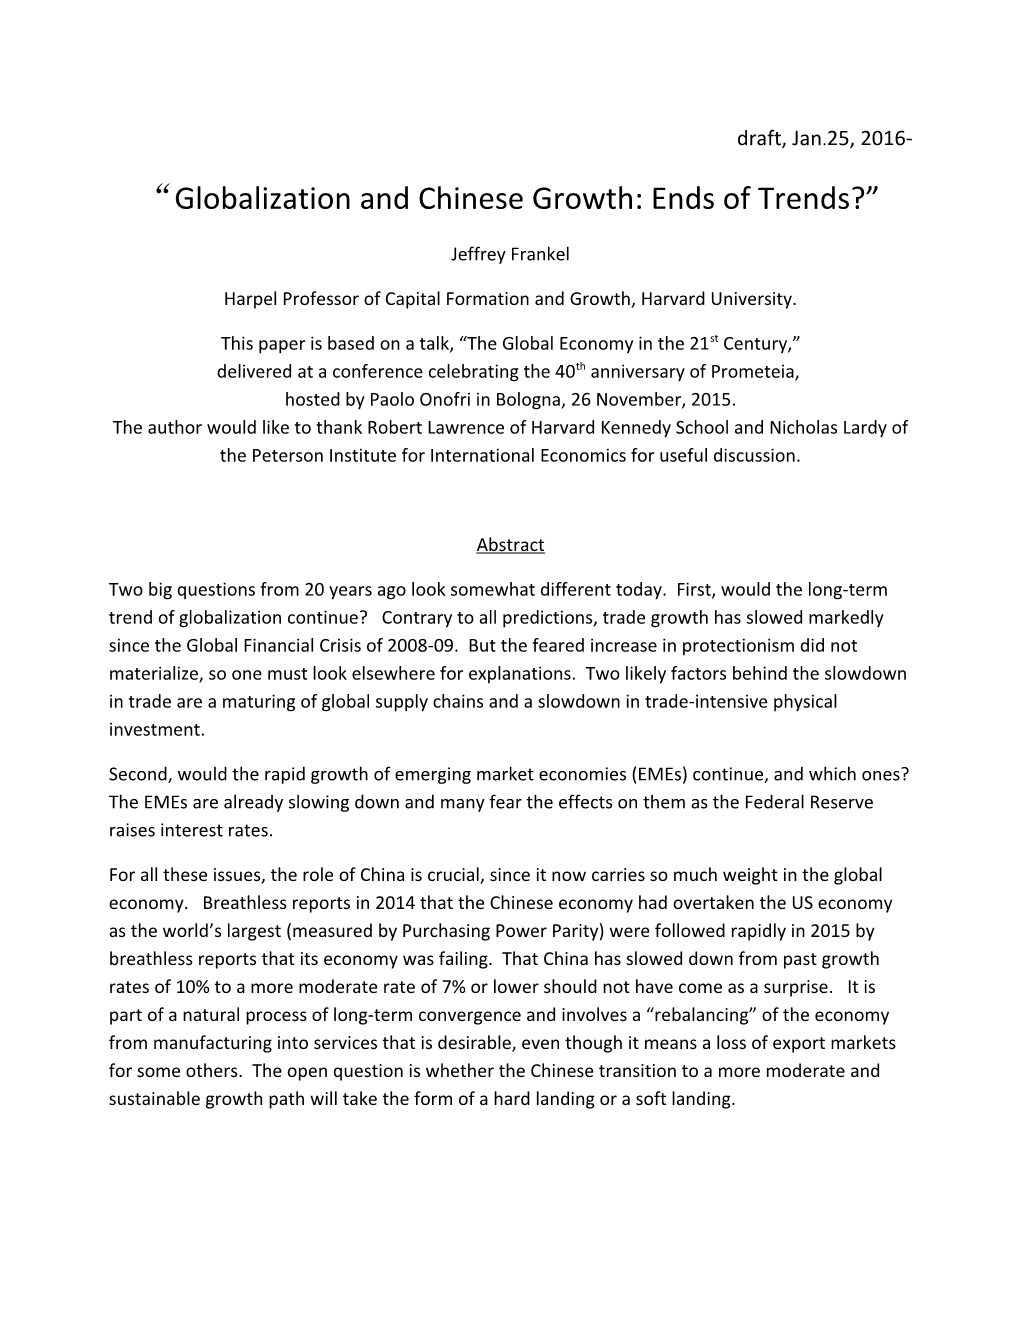 Globalization and Chinese Growth: Ends of Trends?